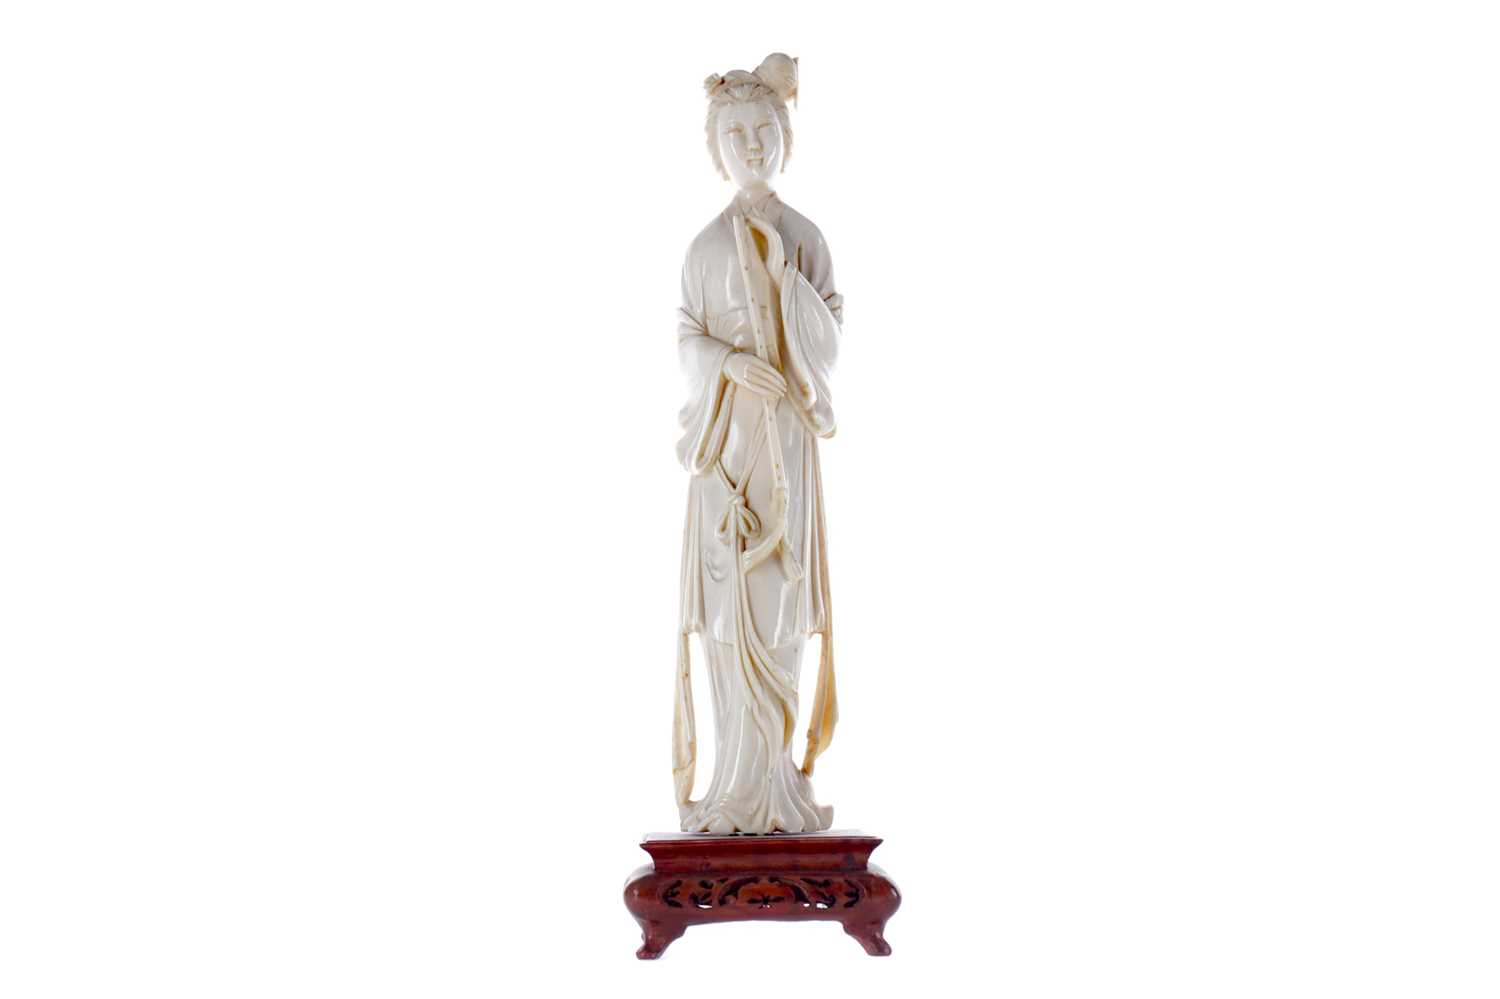 Lot 751 - A LATE 19TH/EARLY 20TH CENTURY CHINESE IVORY CARVING OF A FEMALE